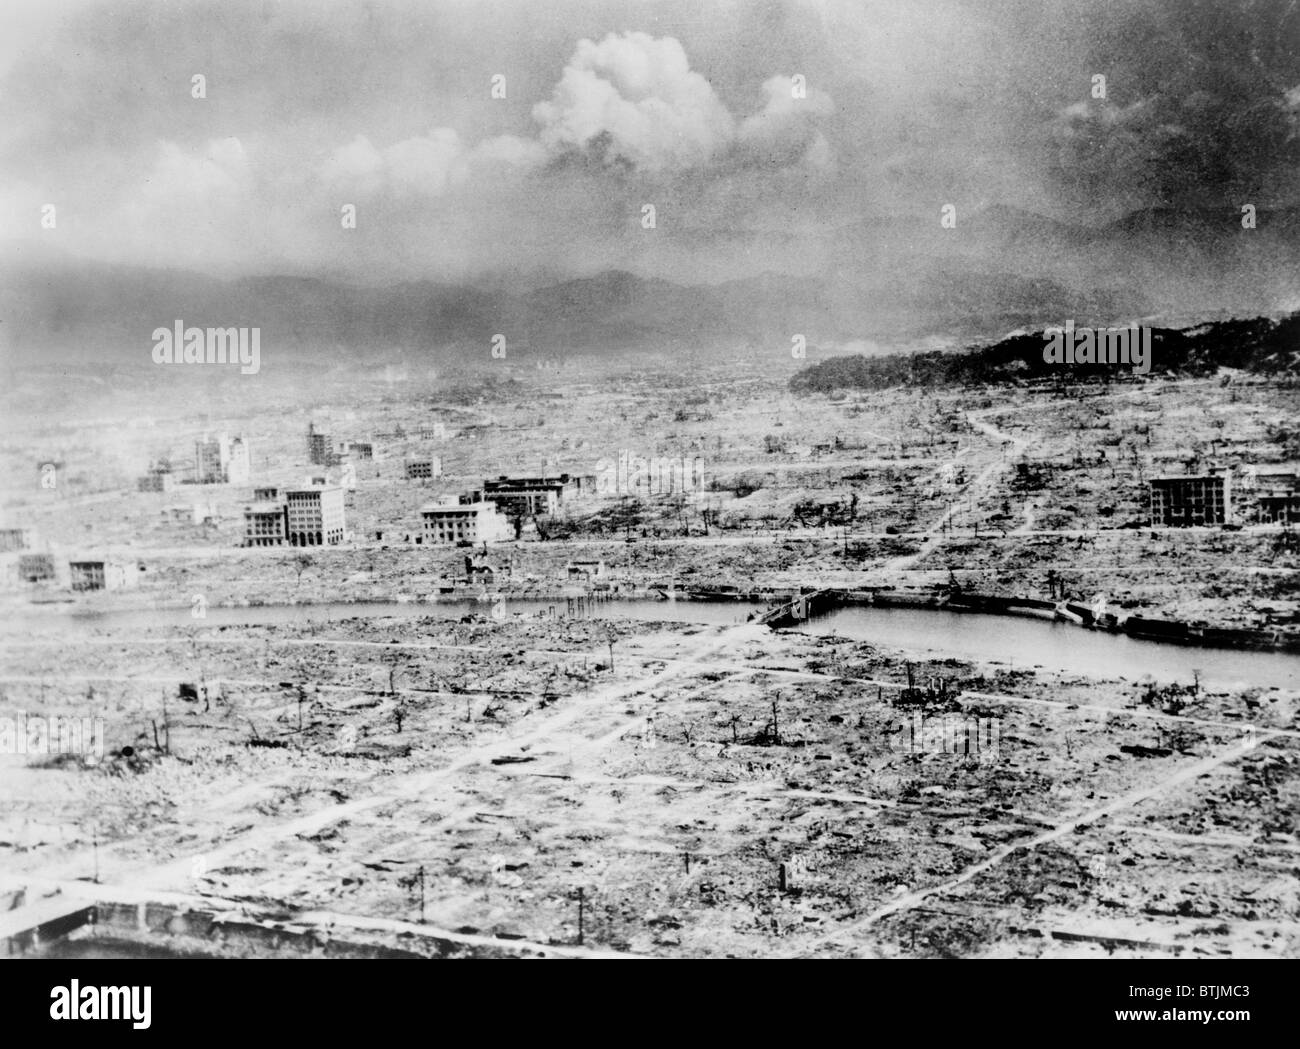 Atomic bomb. Hiroshima, Japan after the atomic bomb was dropped by the US bomber 'Enola Gay', 1945 Stock Photo